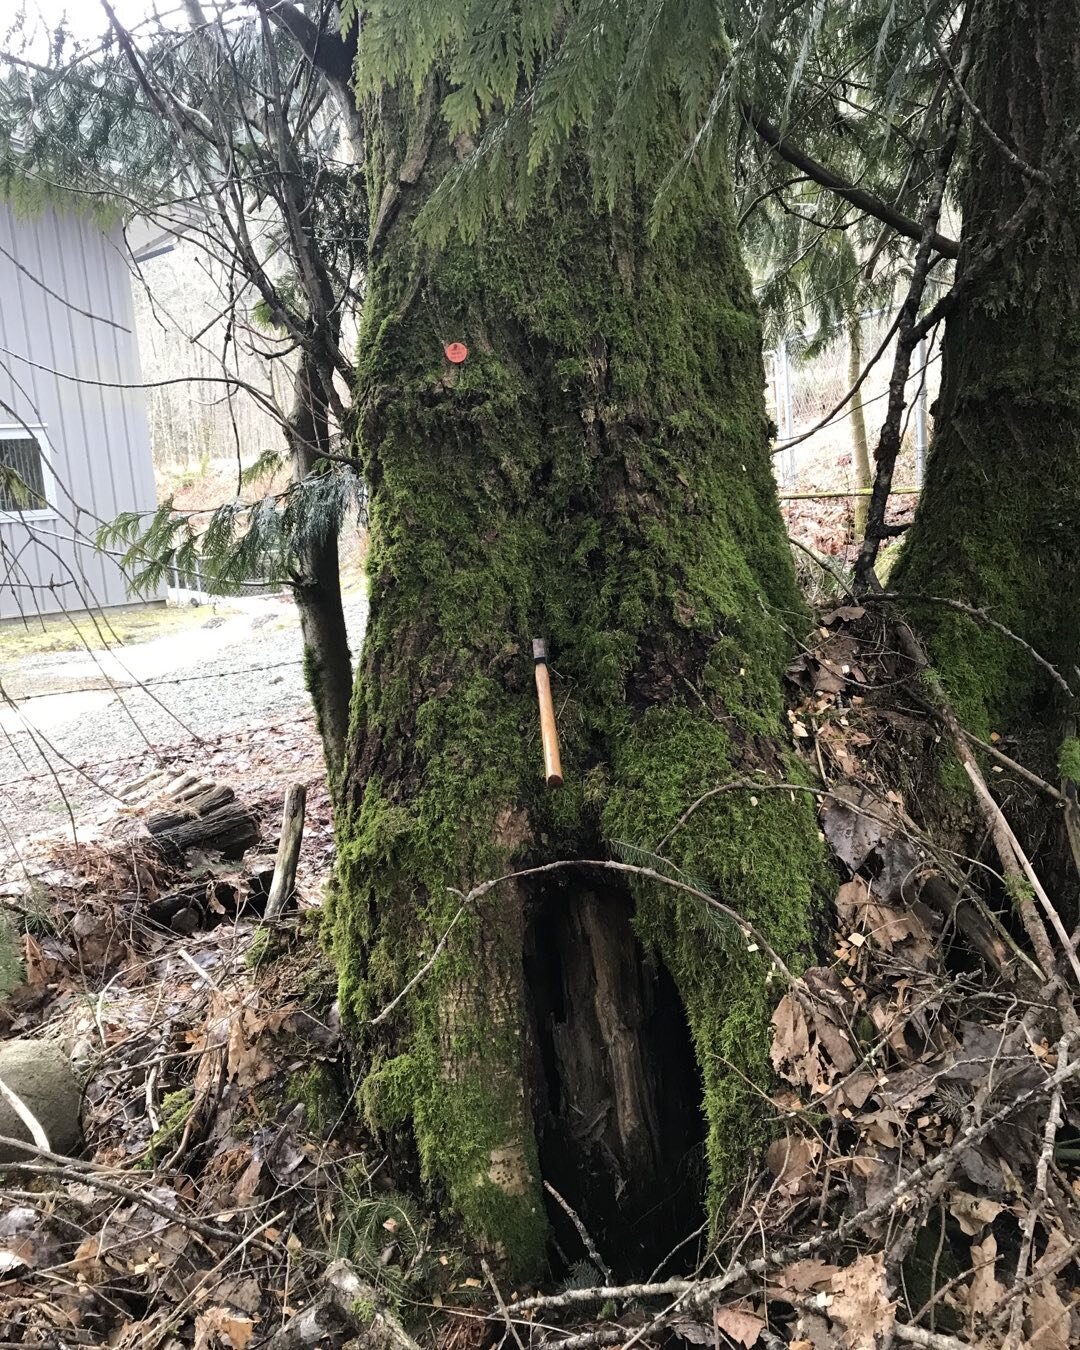 Once the snow melts you can see what dangers lurk beneath. Spring is a good time for danger tree assessments. We can help.